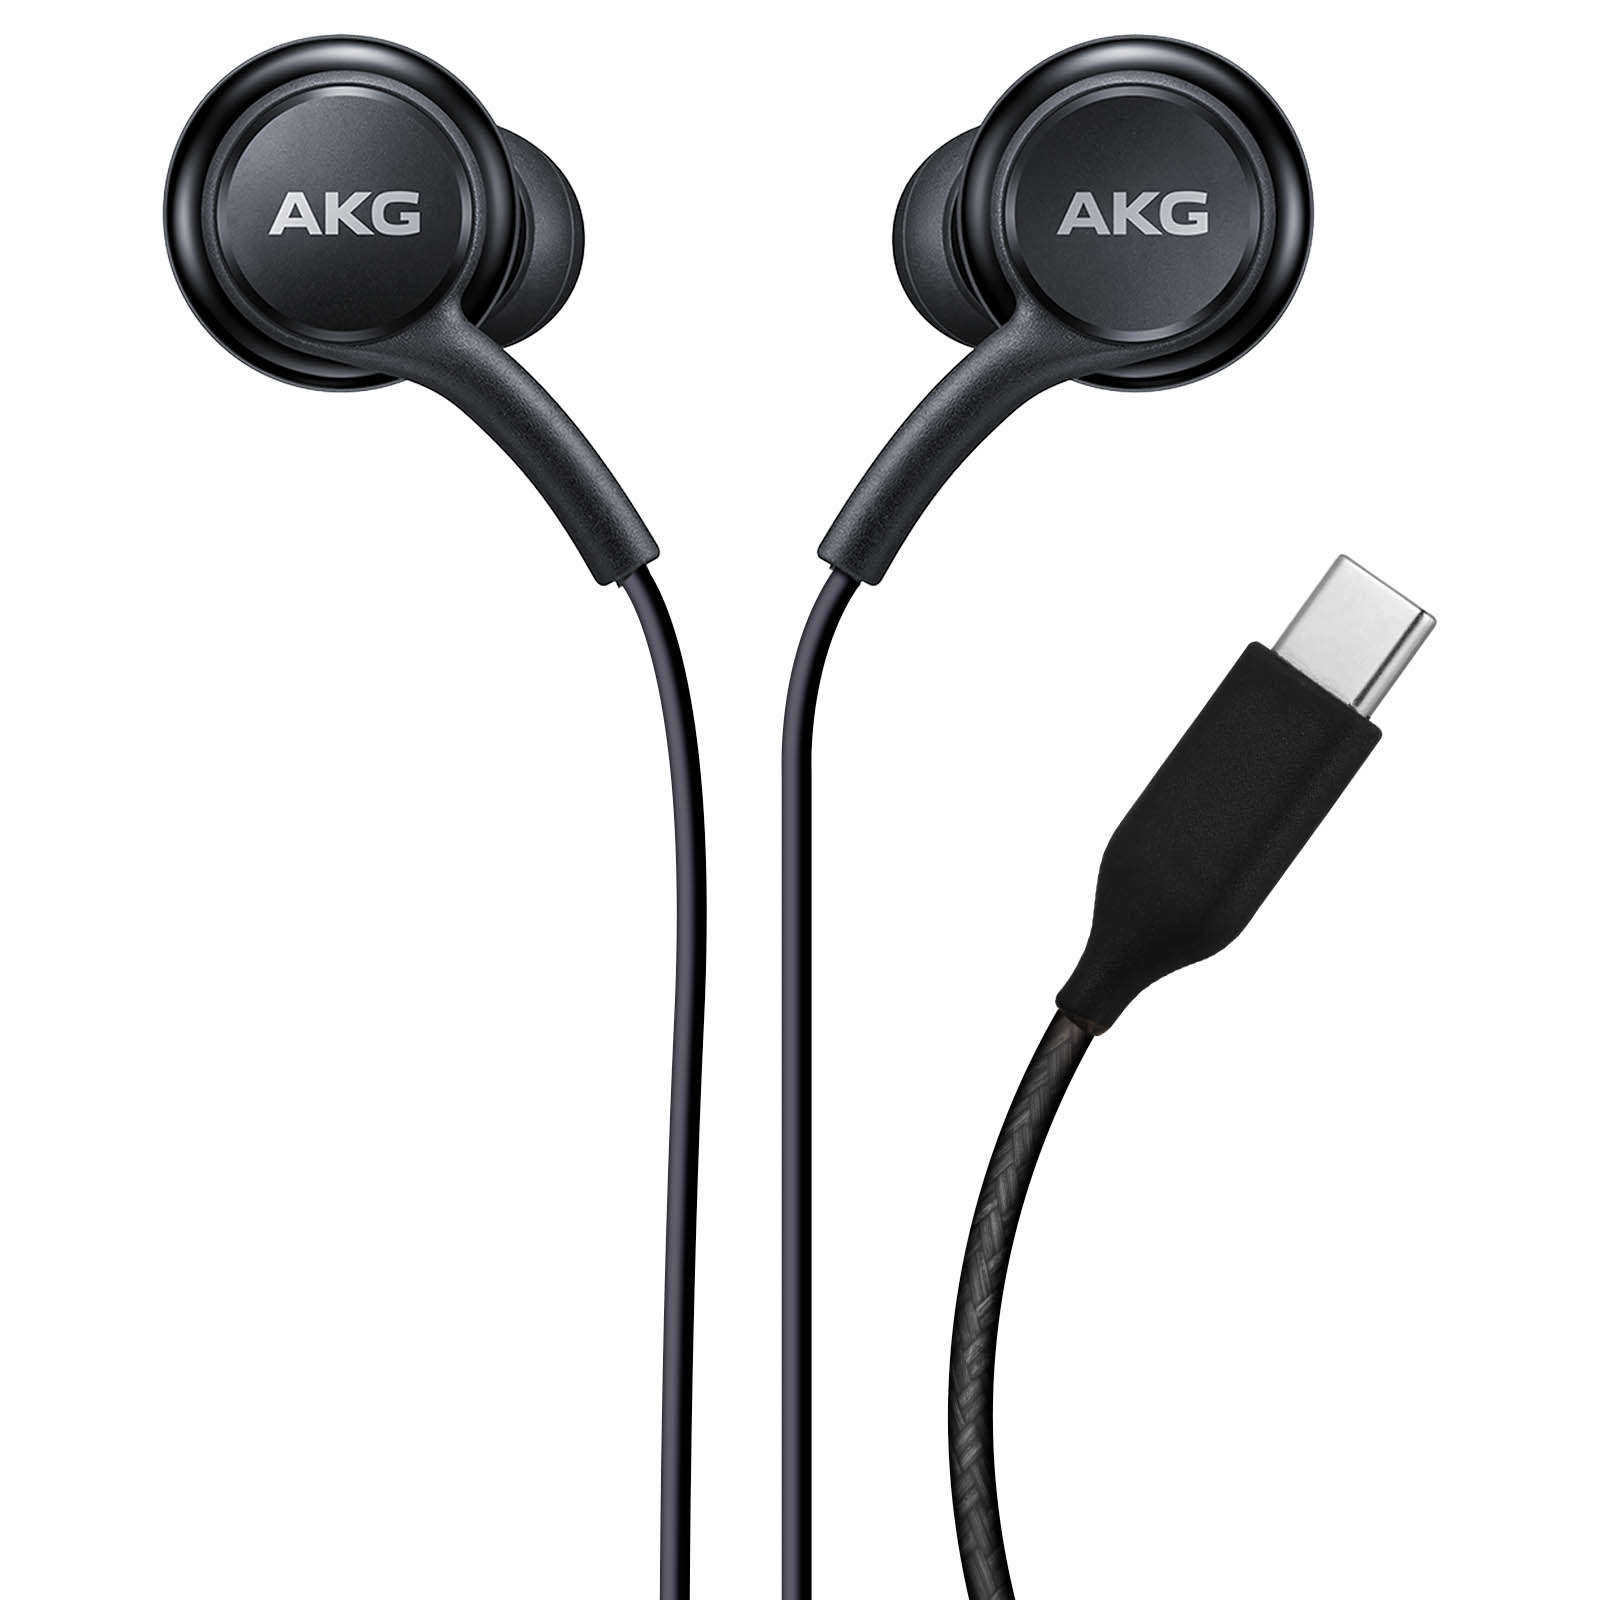 Auriculares Usb Tipo C, Auriculares Usb C Auriculares Tipo C